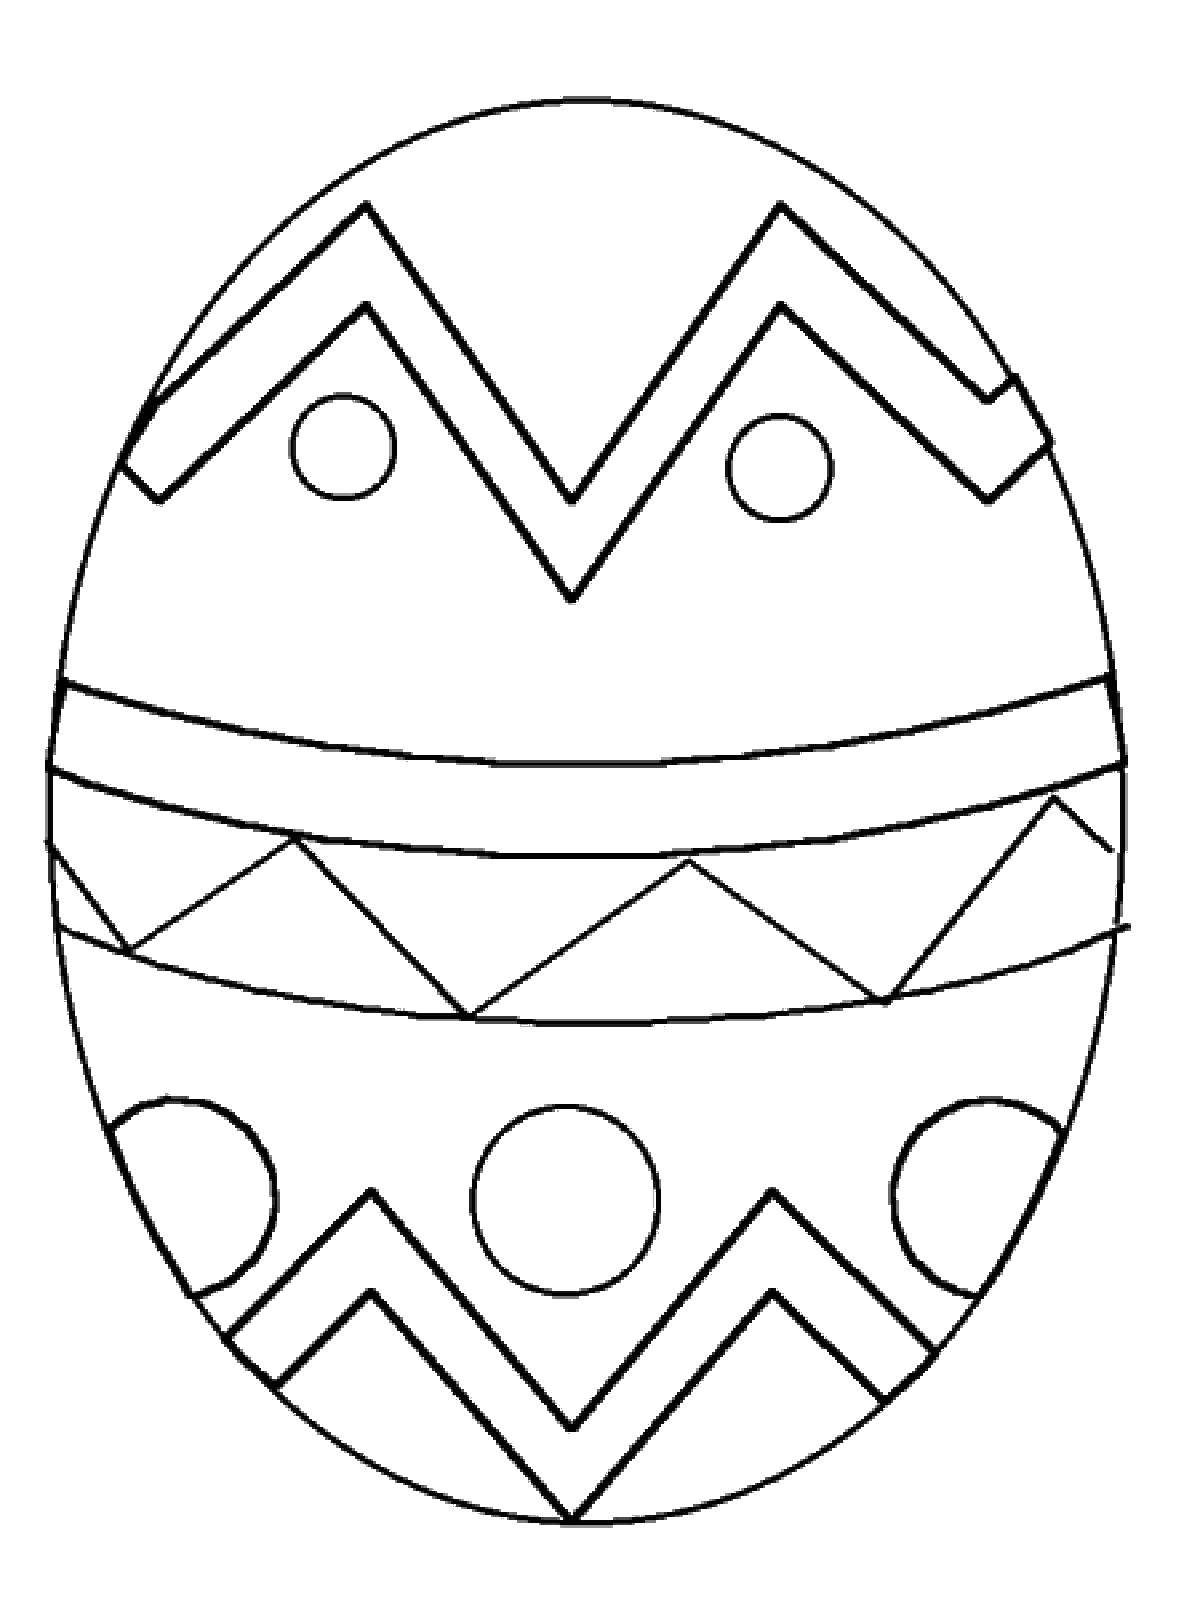 Coloring The joy of Easter. Category coloring Easter. Tags:  egg, Easter.